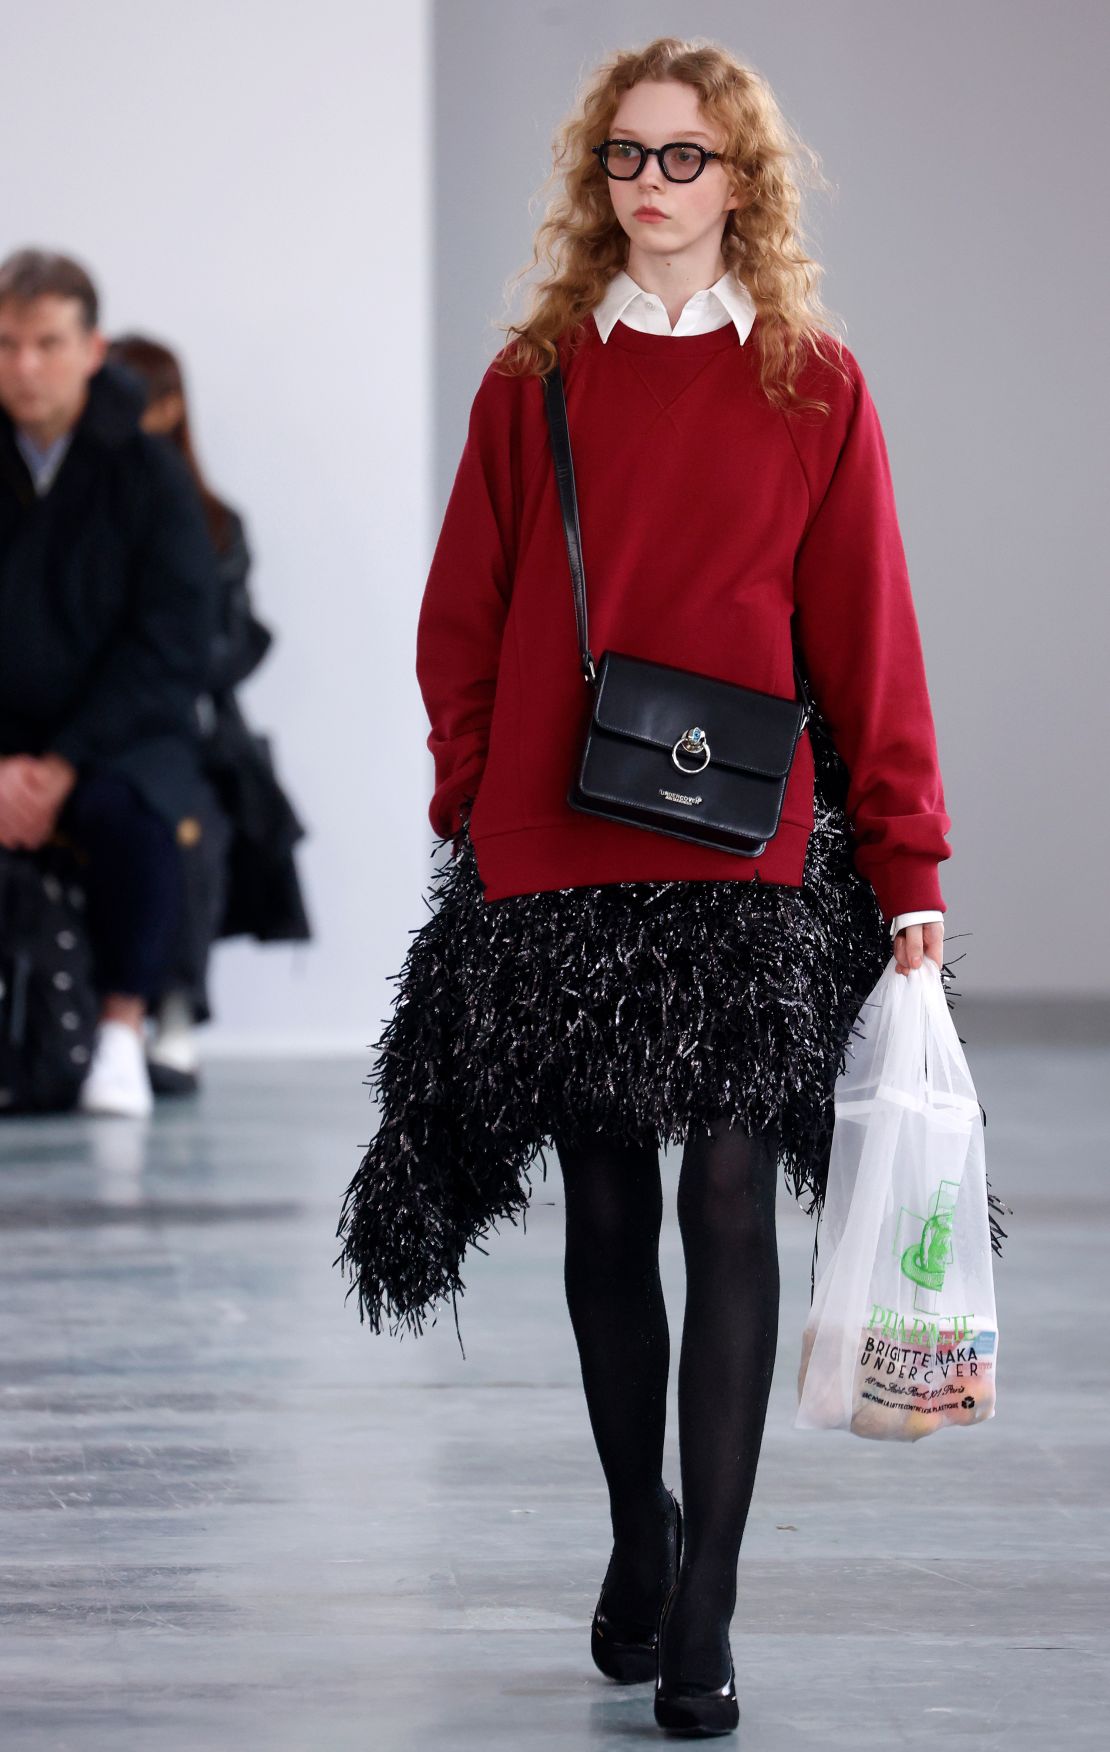 Some models at the Undercover show sported bags of groceries as a nod to the multiple roles taken on by working mothers.